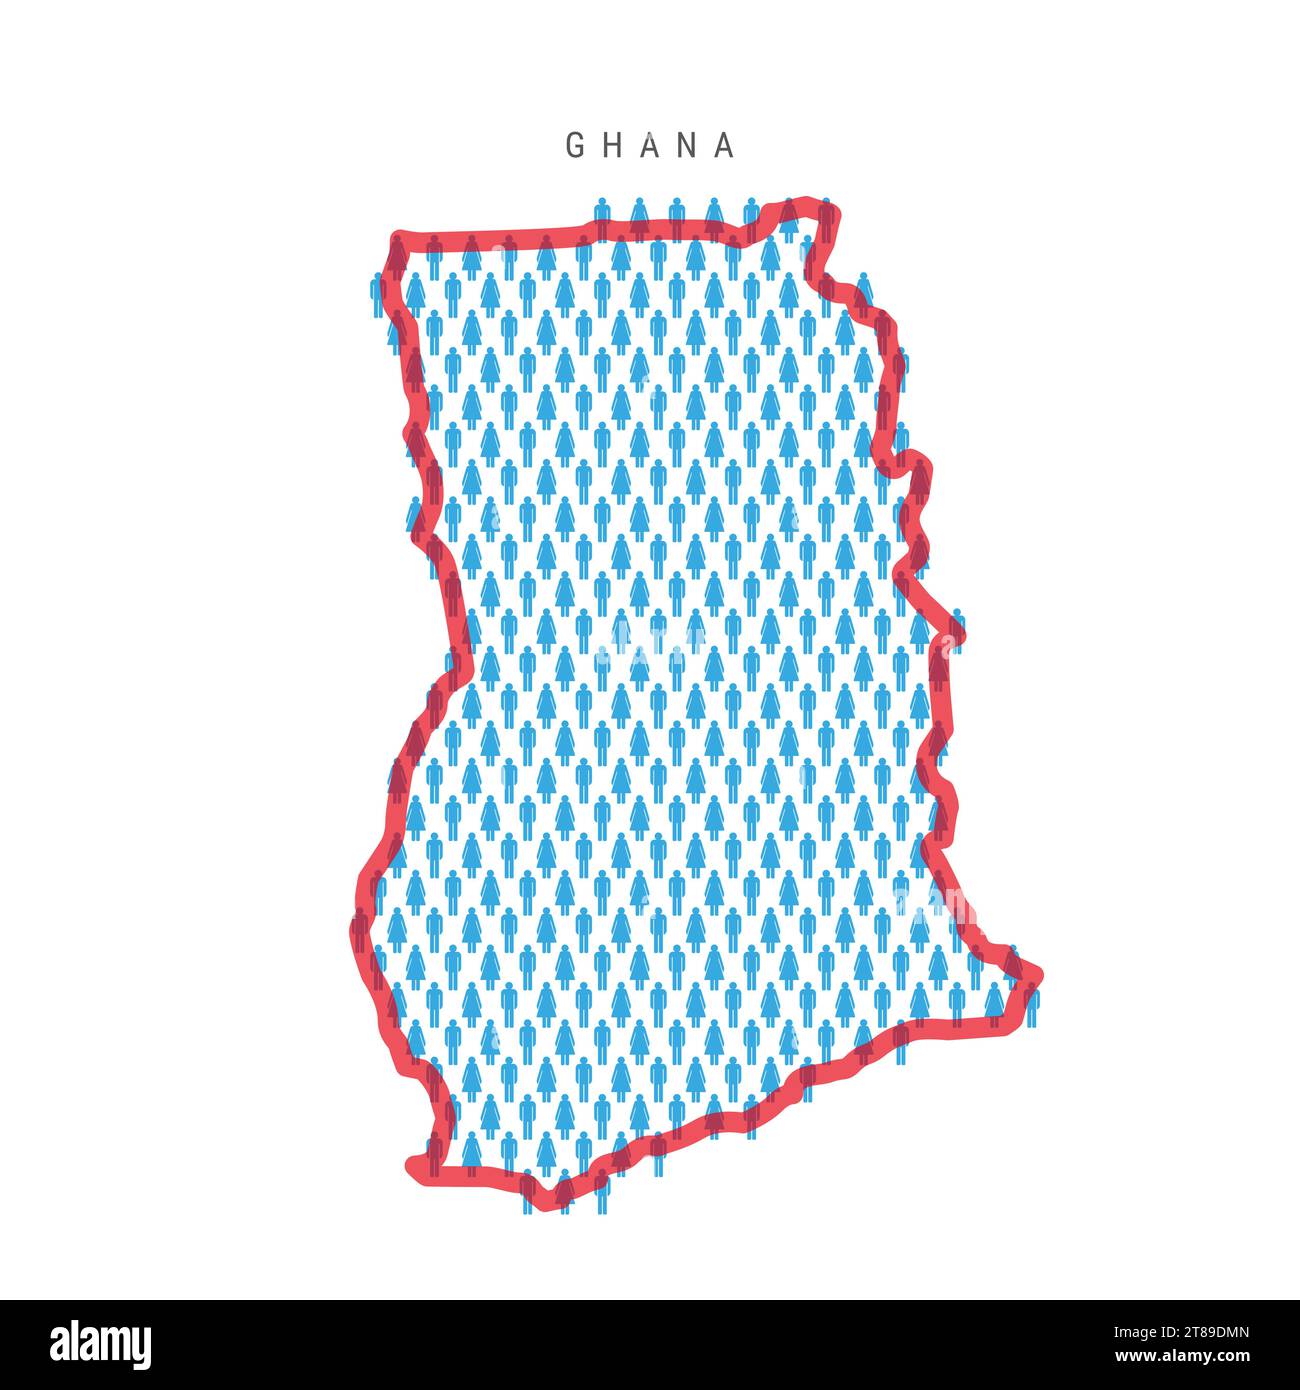 Ghana population map. Stick figures Ghanaian people map with bold red translucent country border. Pattern of men and women icons. Isolated vector illu Stock Vector